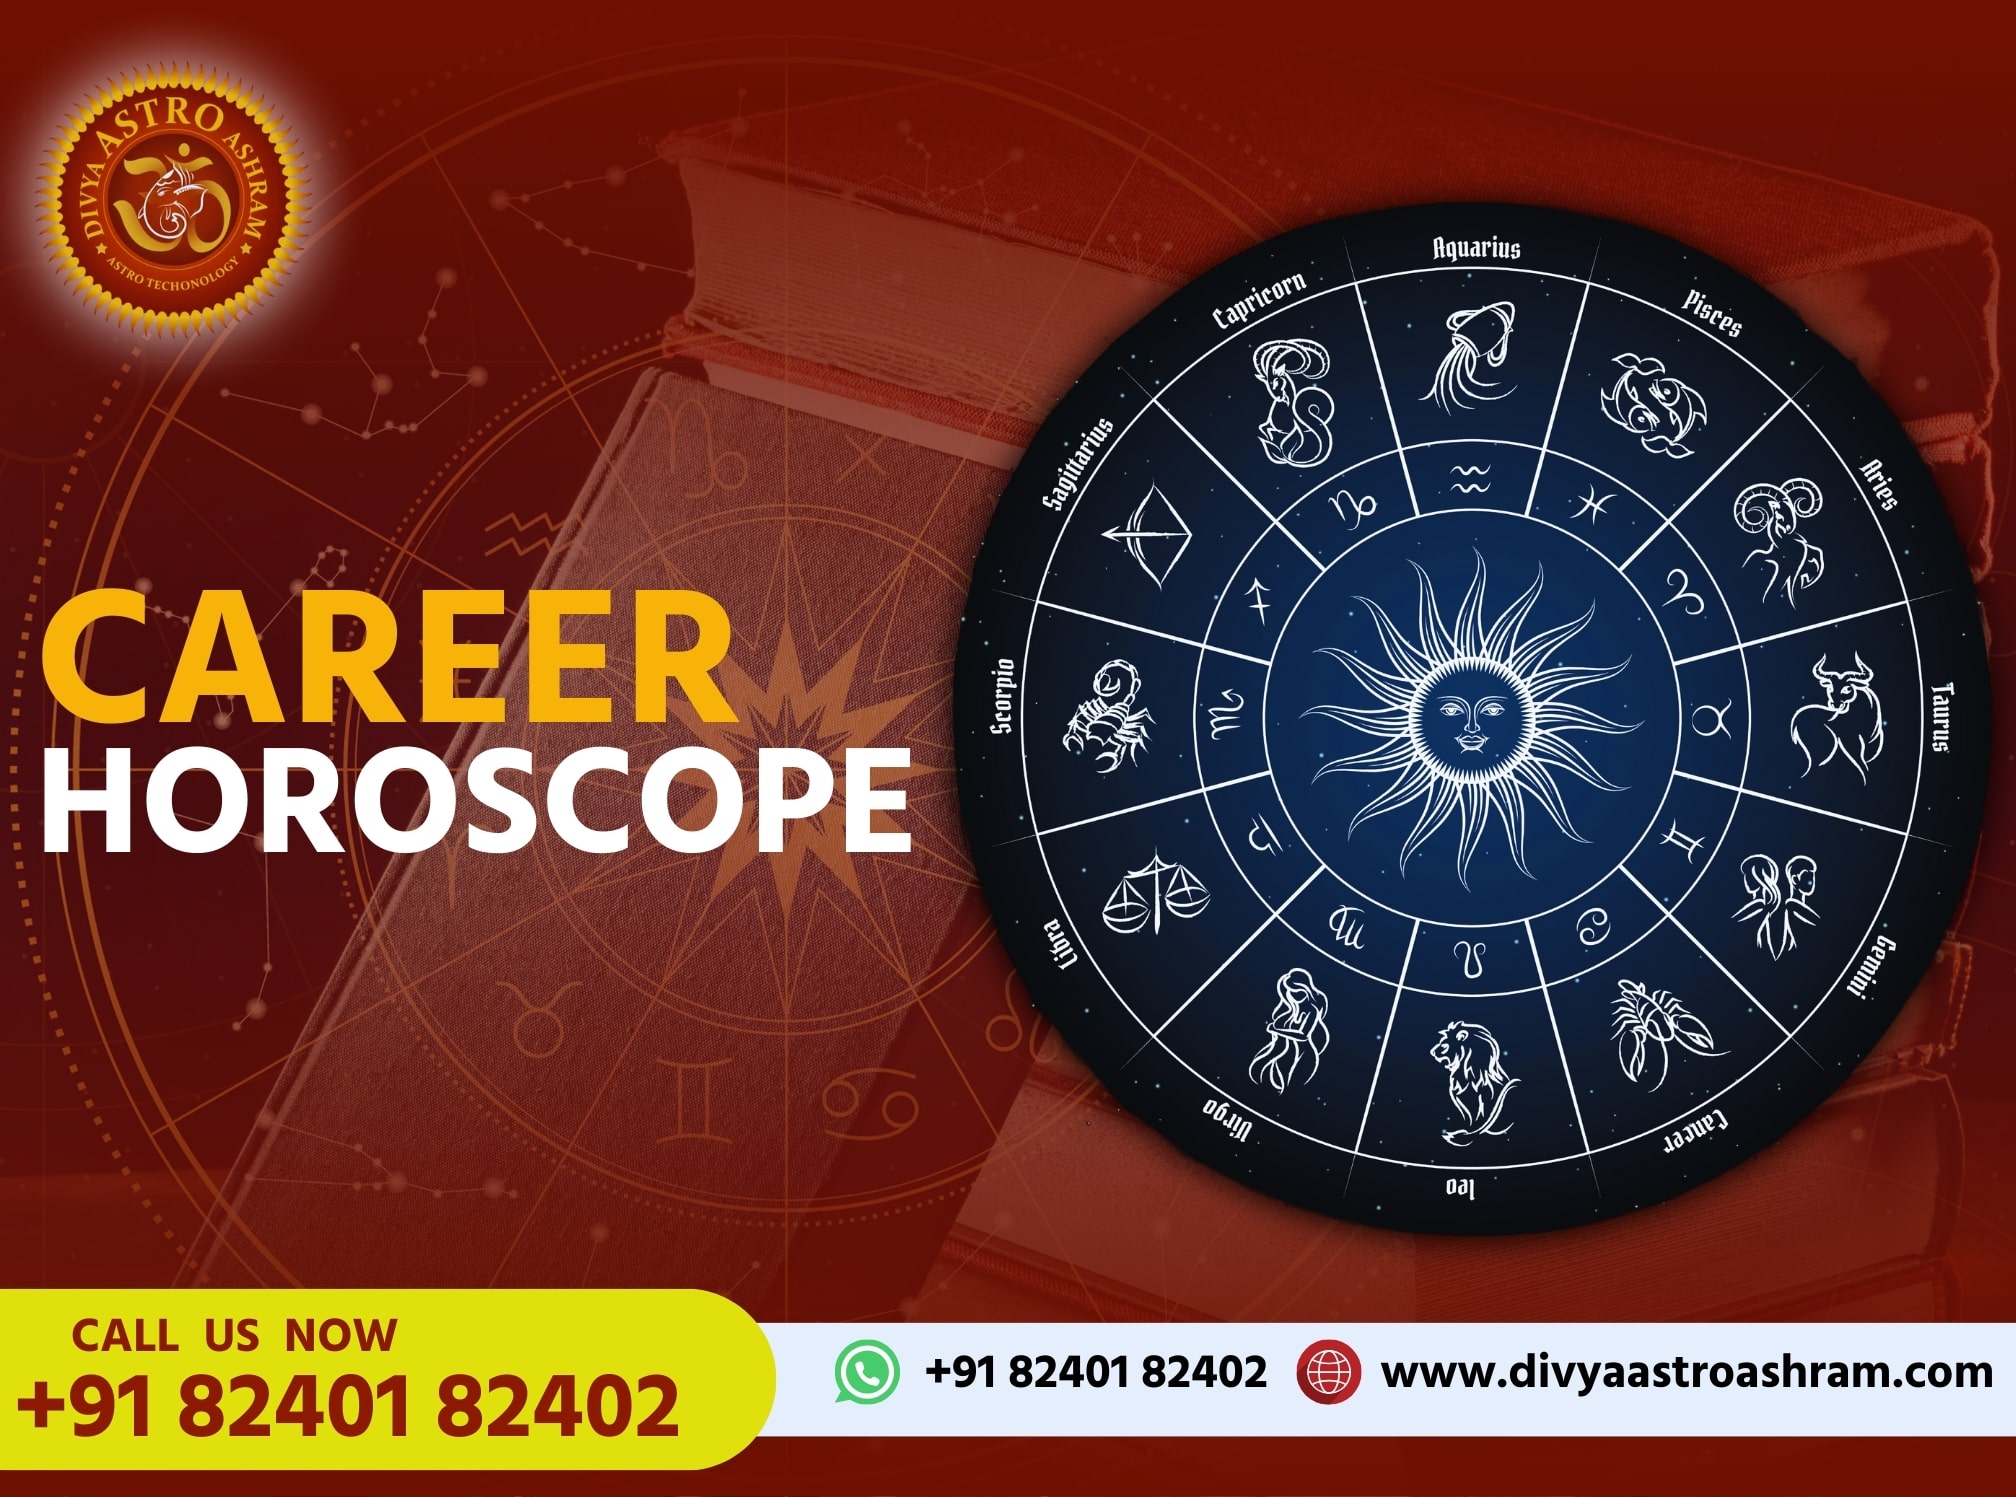 Discover Your Professional Destiny Through Career HoroscopeServicesAstrology - NumerologyAll Indiaother